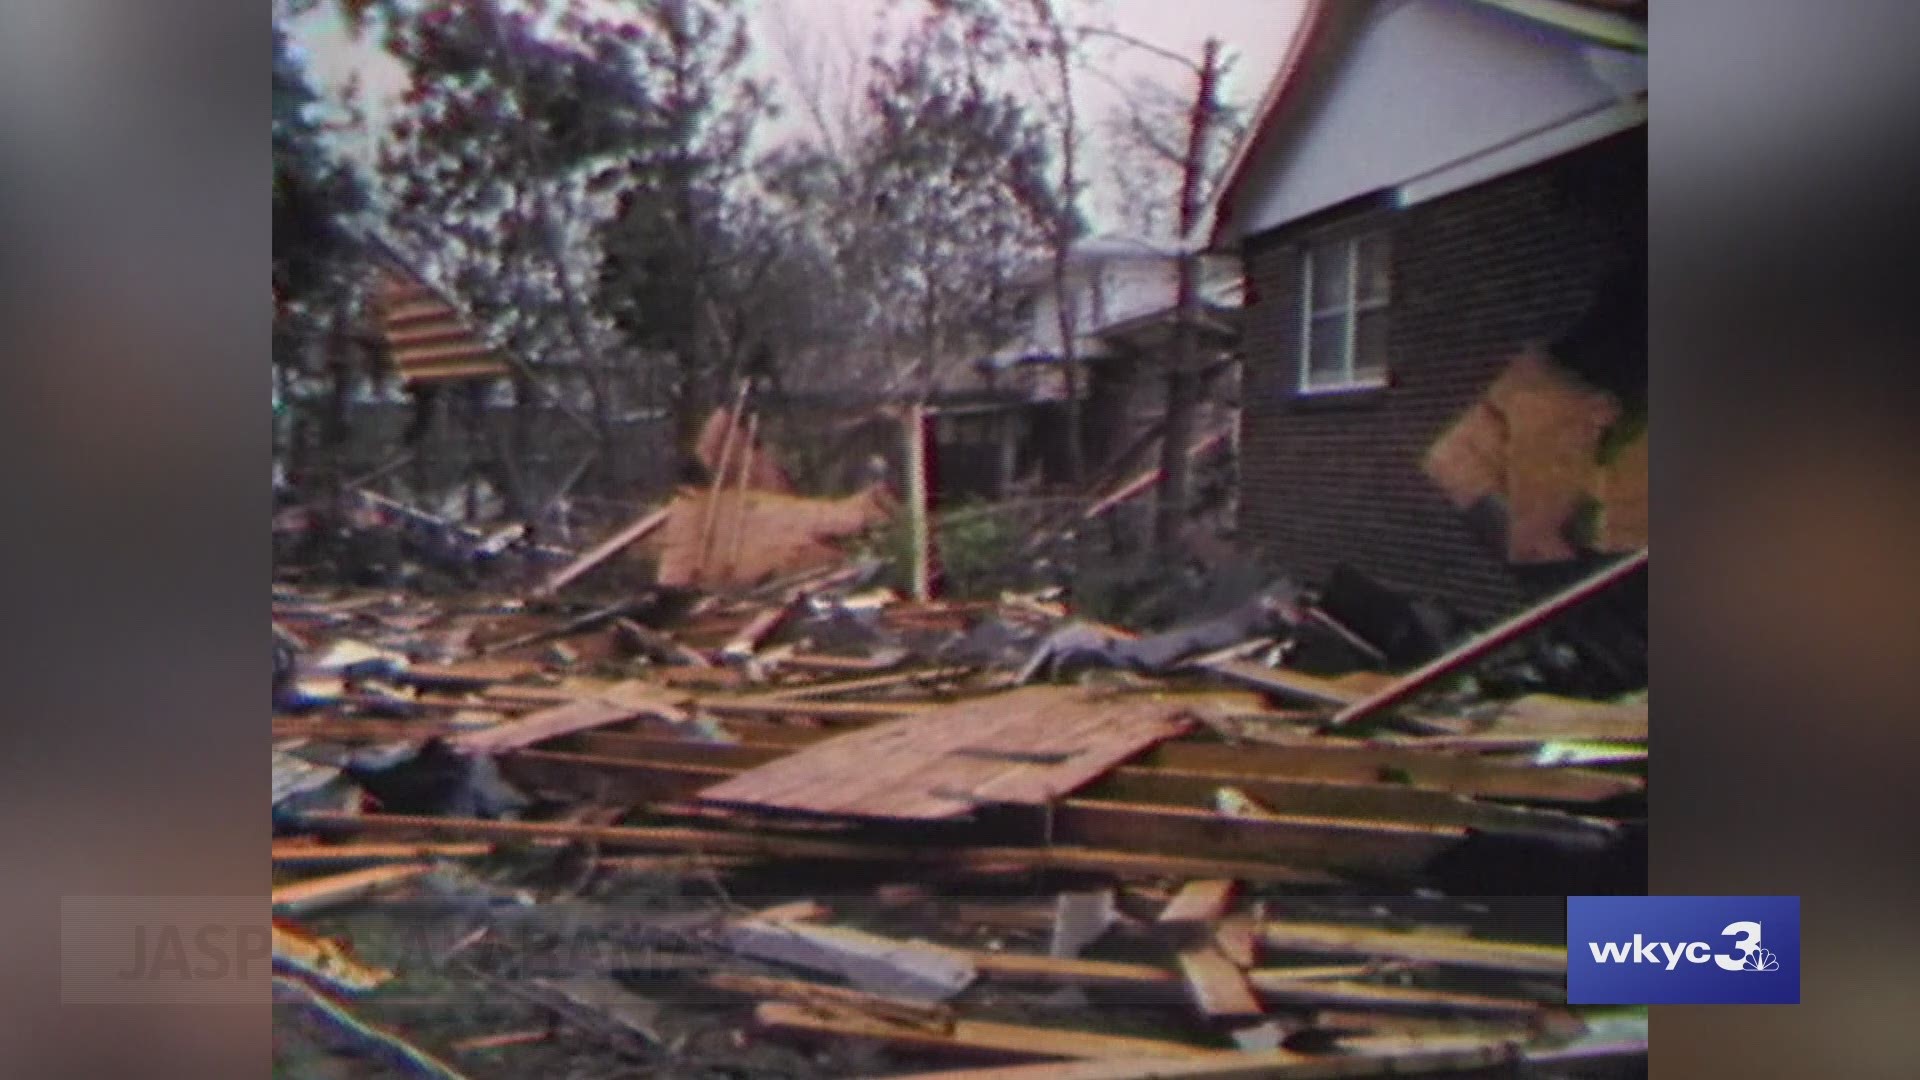 April 3 and 4th mark the 45th Anniversary of the Super Tornado Outbreak of 1974